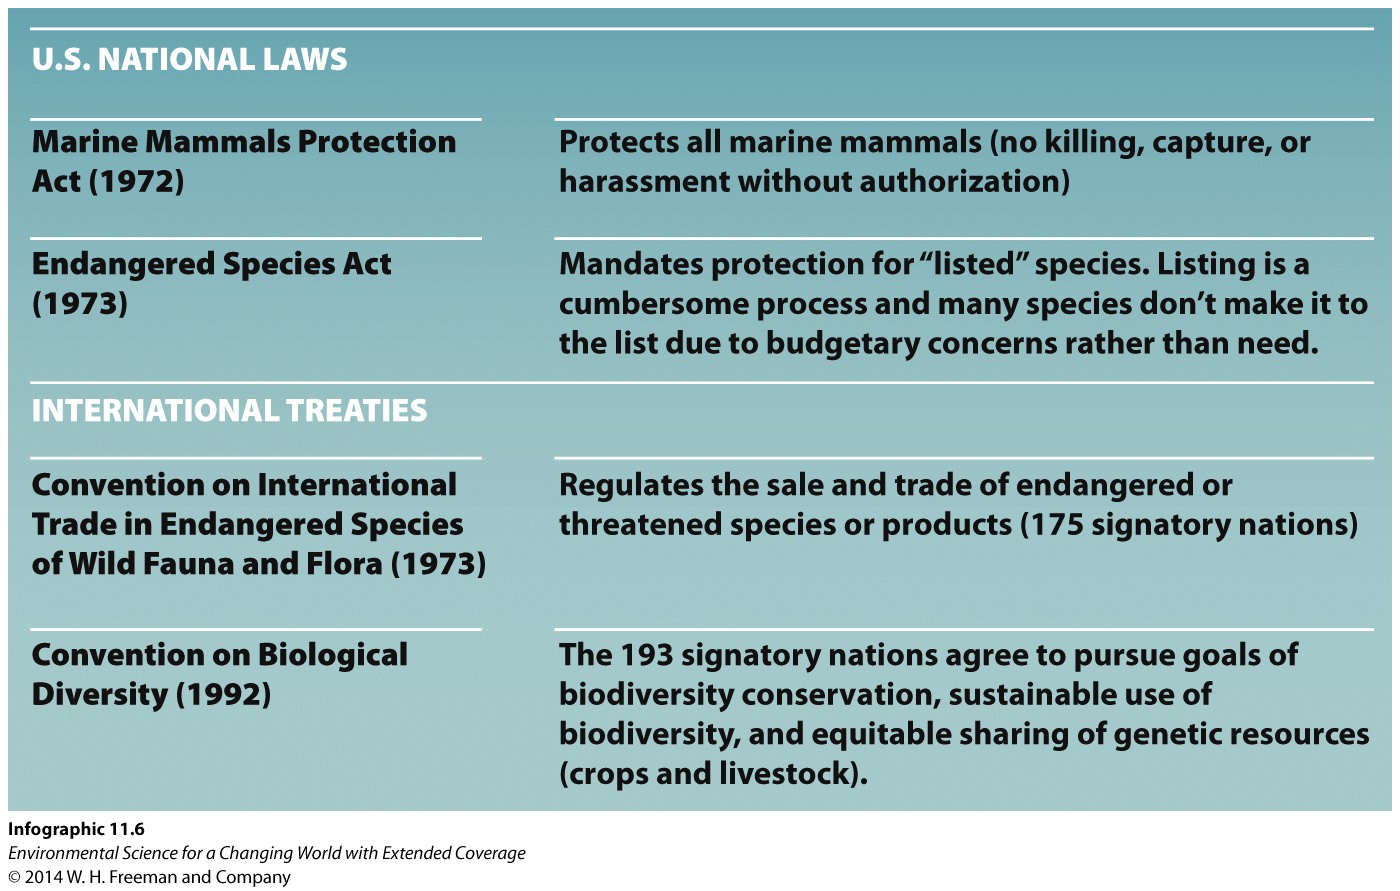 Infographic 11.6: Legal Protection for Species